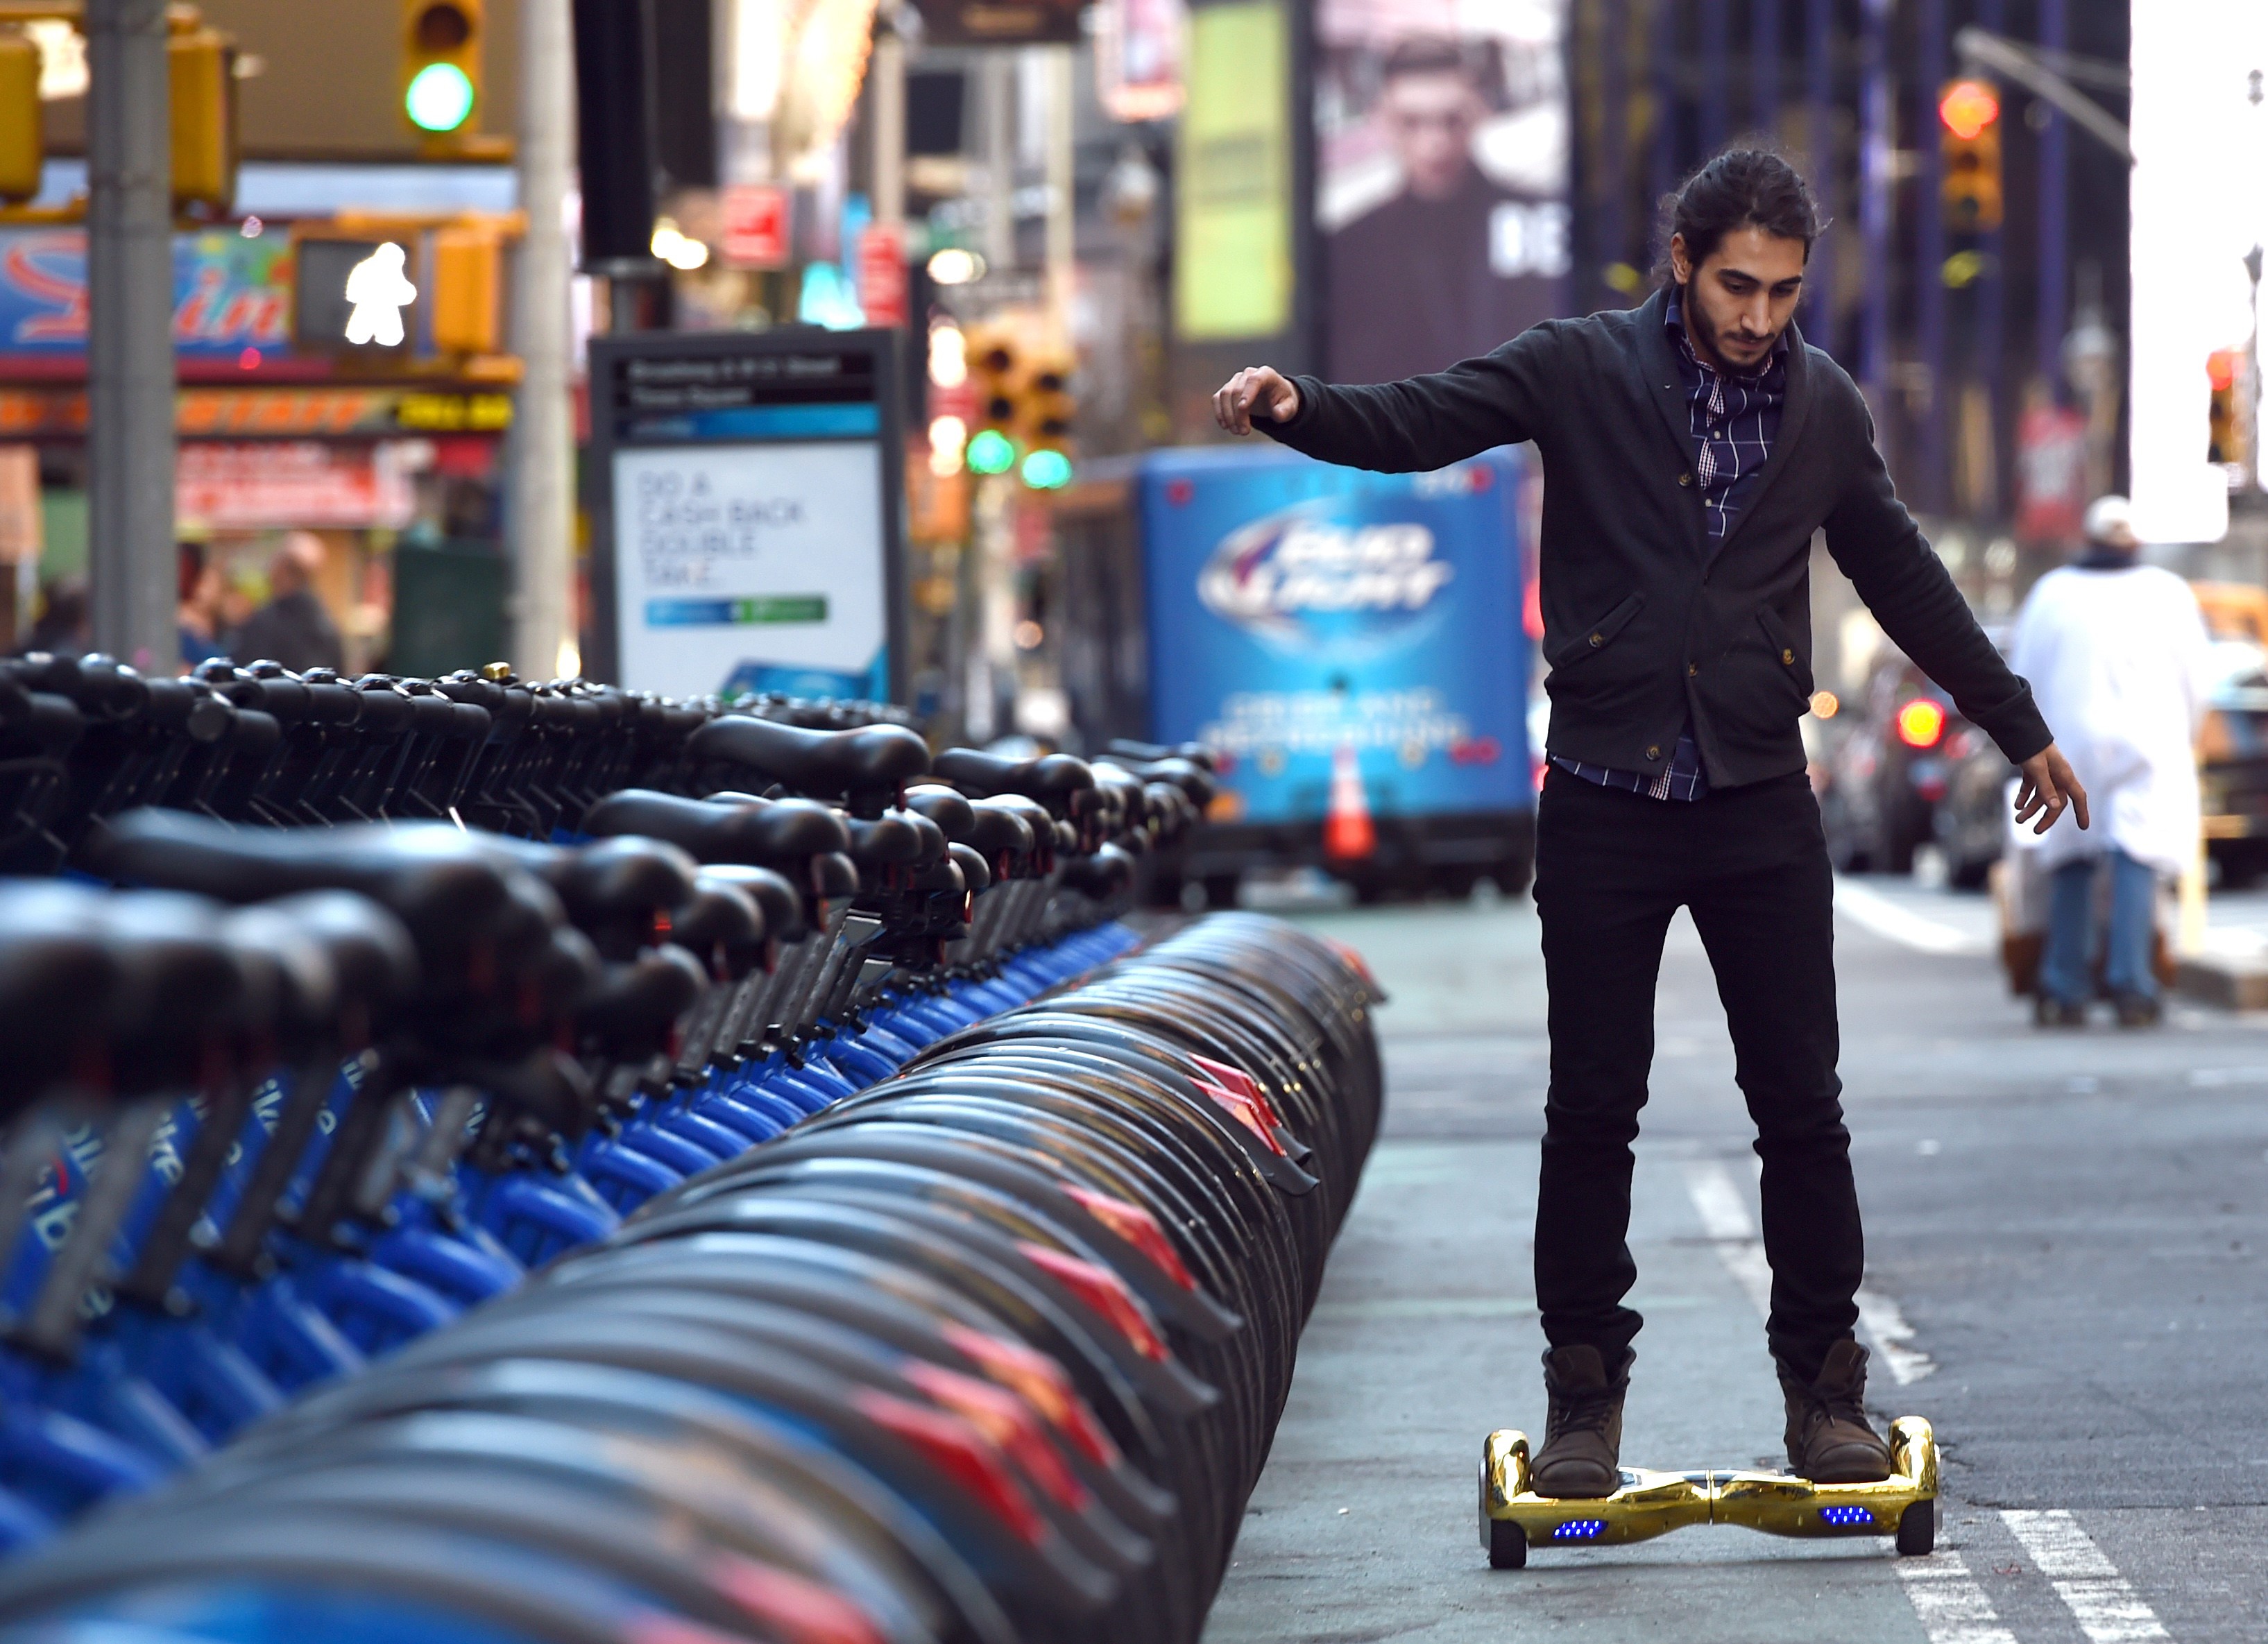 Whizboard Store manager 'Mor Loud' demonstrates the Hoverboard on Broadway in Times Square  December 15, 2015. (Photo: TIMOTHY A. CLARY/AFP/Getty Images)